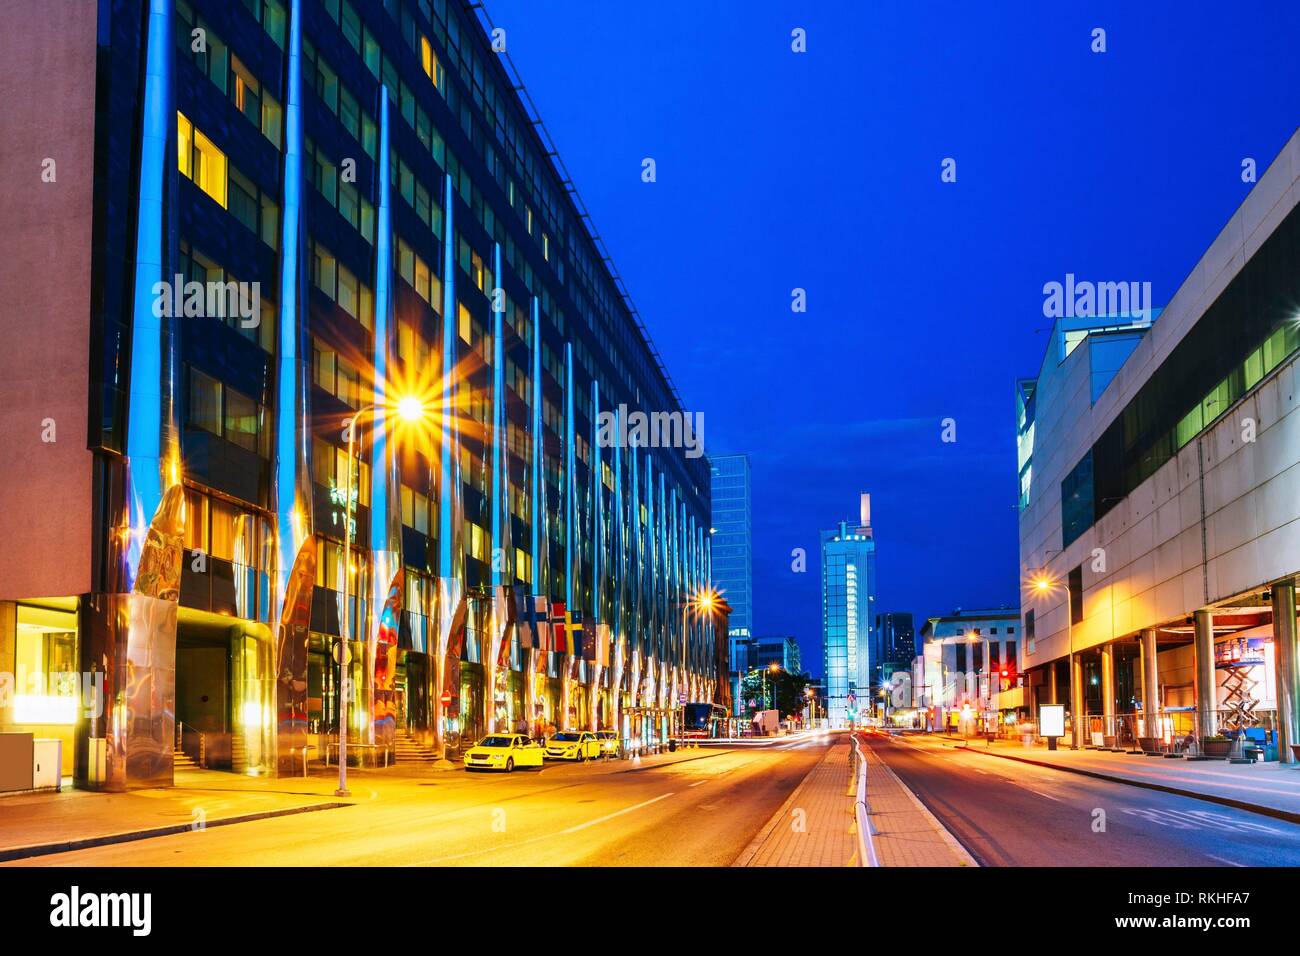 Tallinn, Estonia. Night View Of Hotel Building In Evening Or Night Illumination On A. Laikmaa Street In Kompassi Subdistrict In The District Of Stock Photo